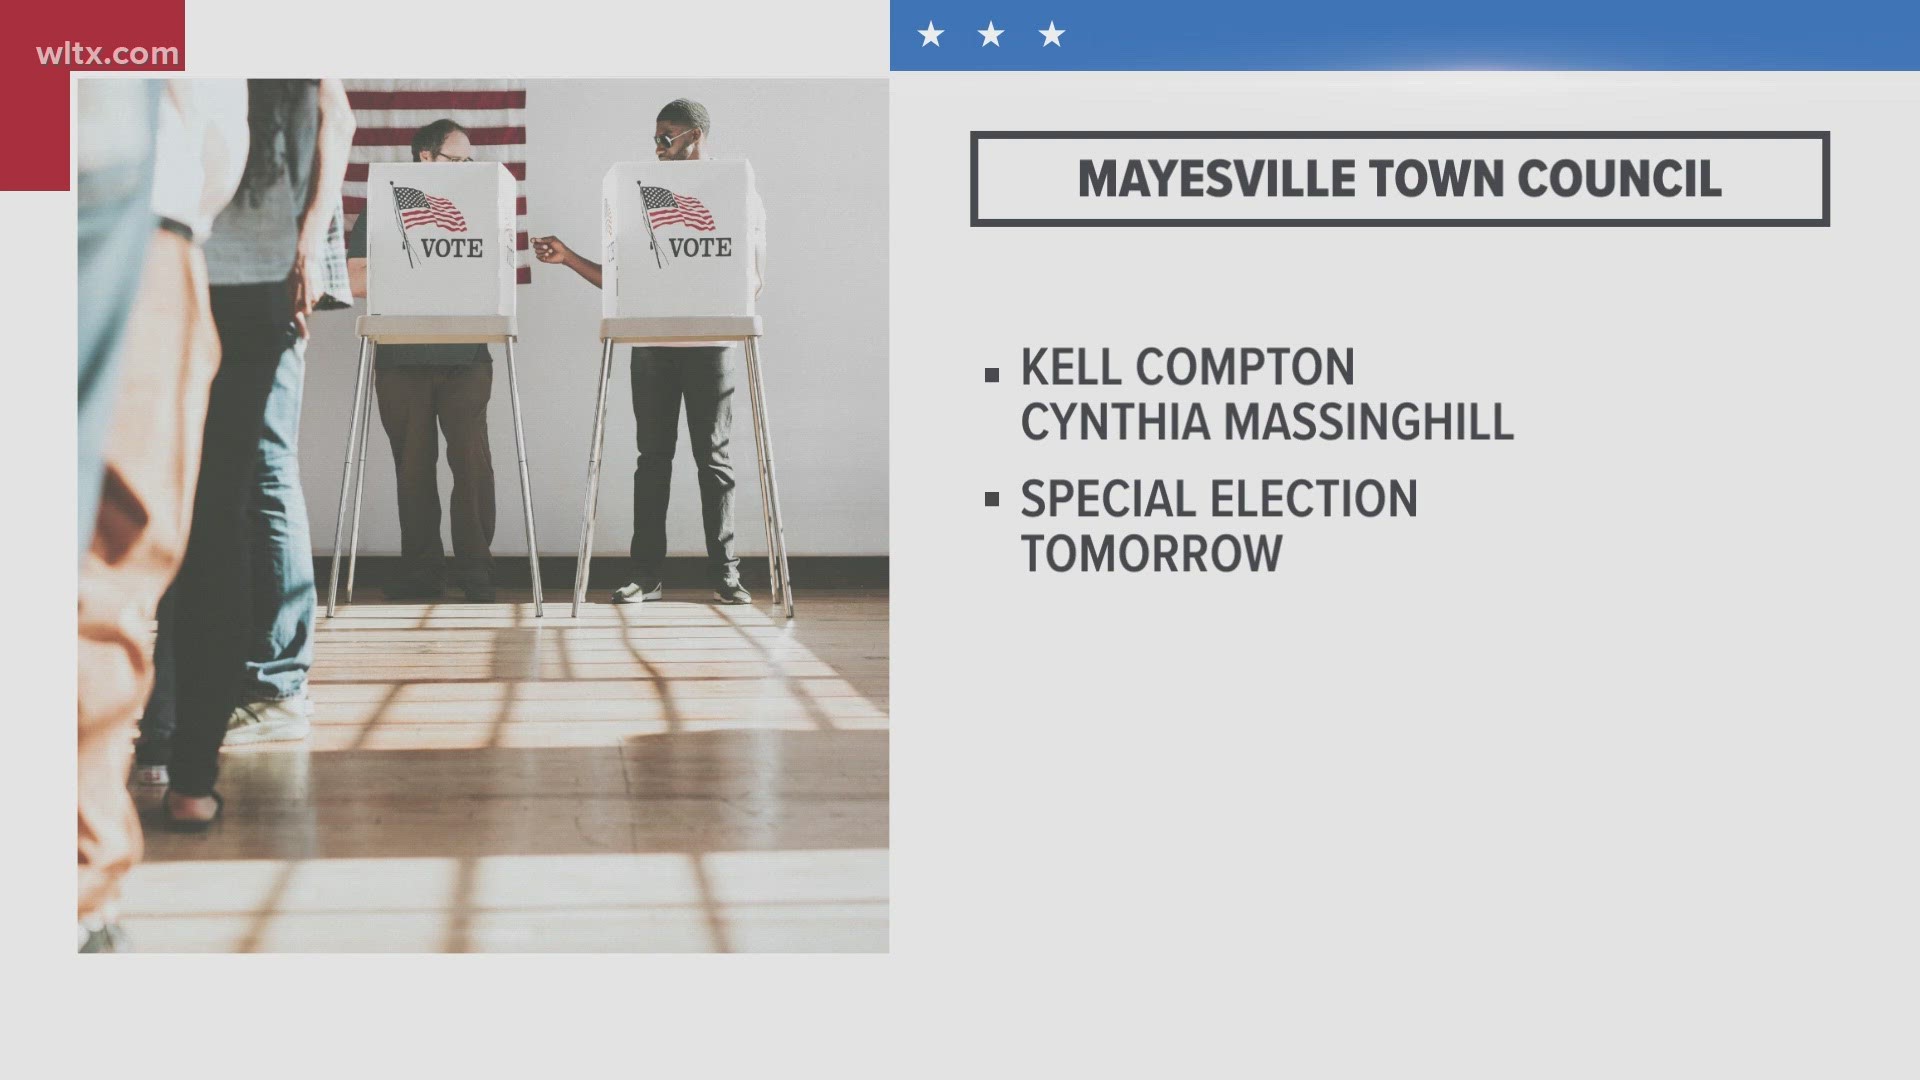 Two candidates are on the ballot; Kell Compton and Cynthia Massinghill.